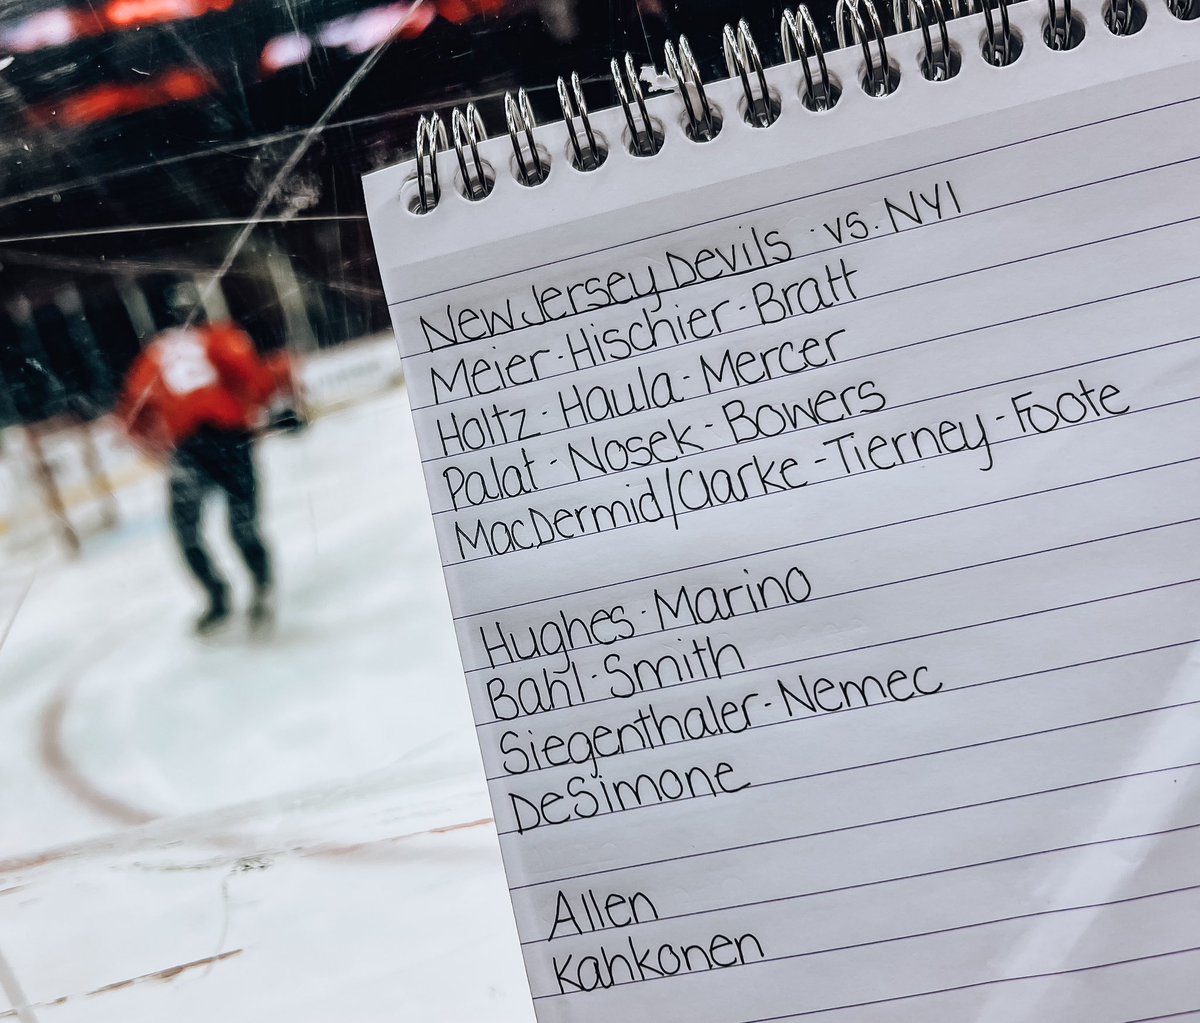 Here’s your #NJDevils morning skate lines and pairings for Game 82. • Tomas Nosek appears good to go • Allen starts • We’ll see during warmups how that 4th line plays out.